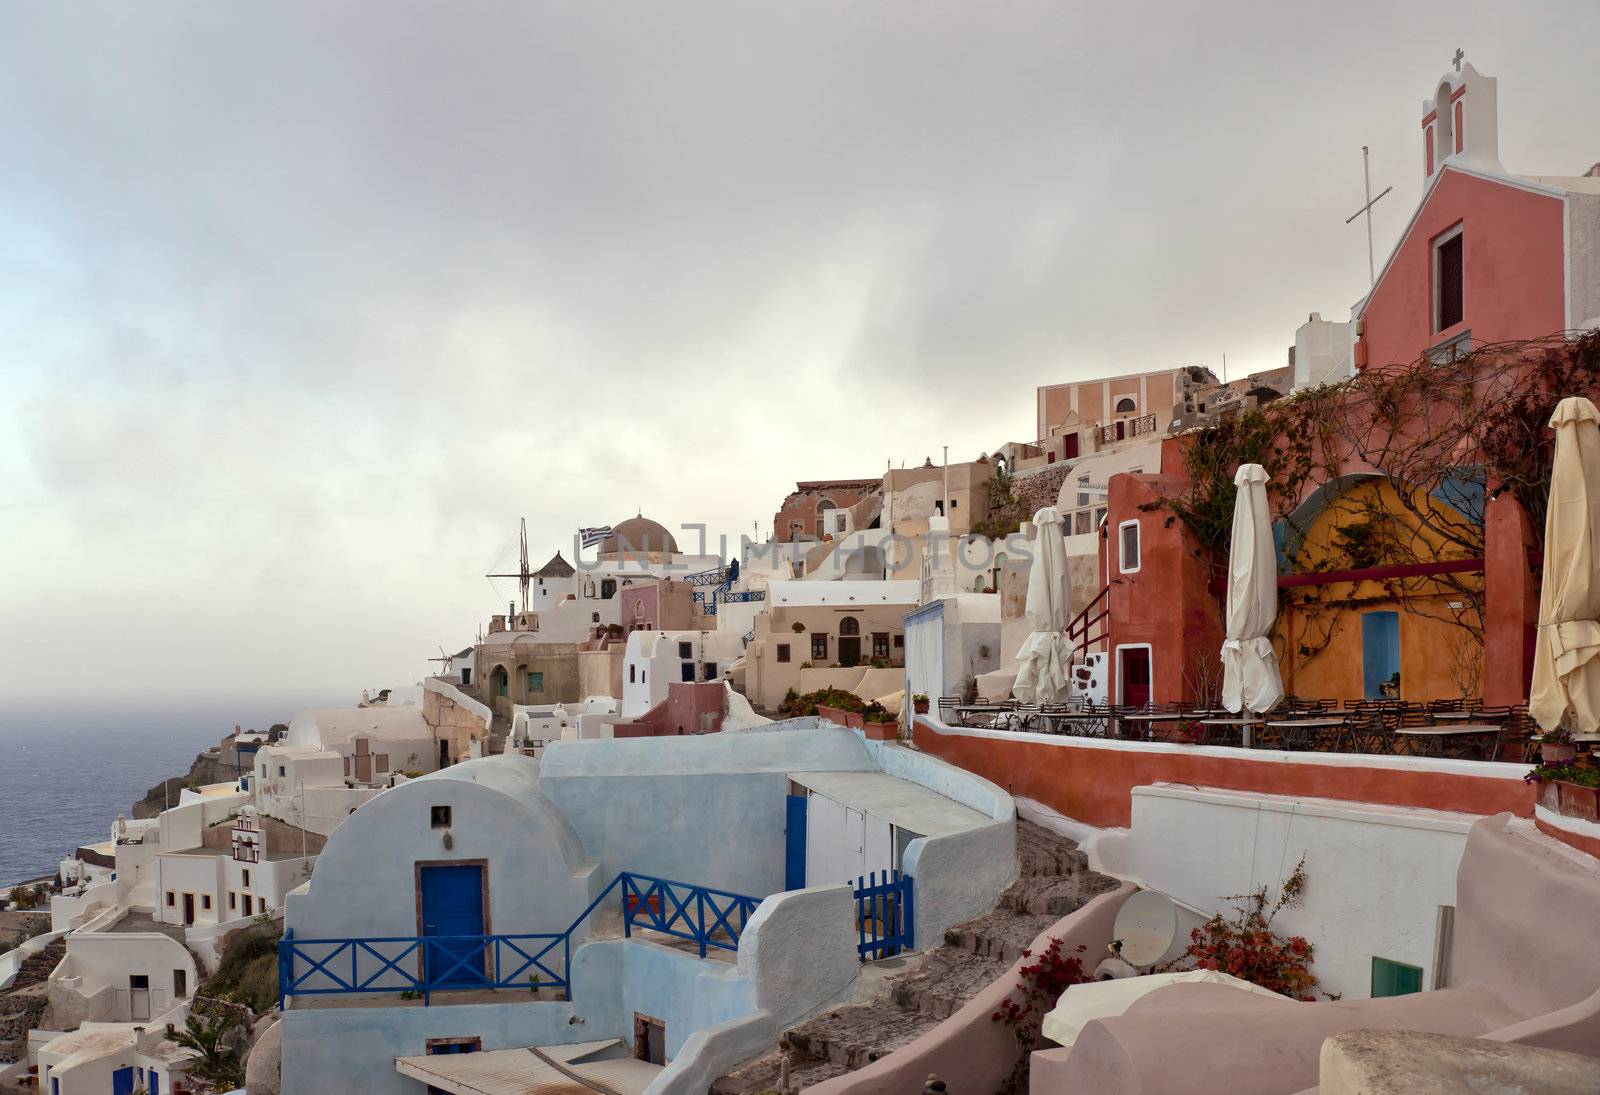 Morning in the cyclades village with traditional buildings